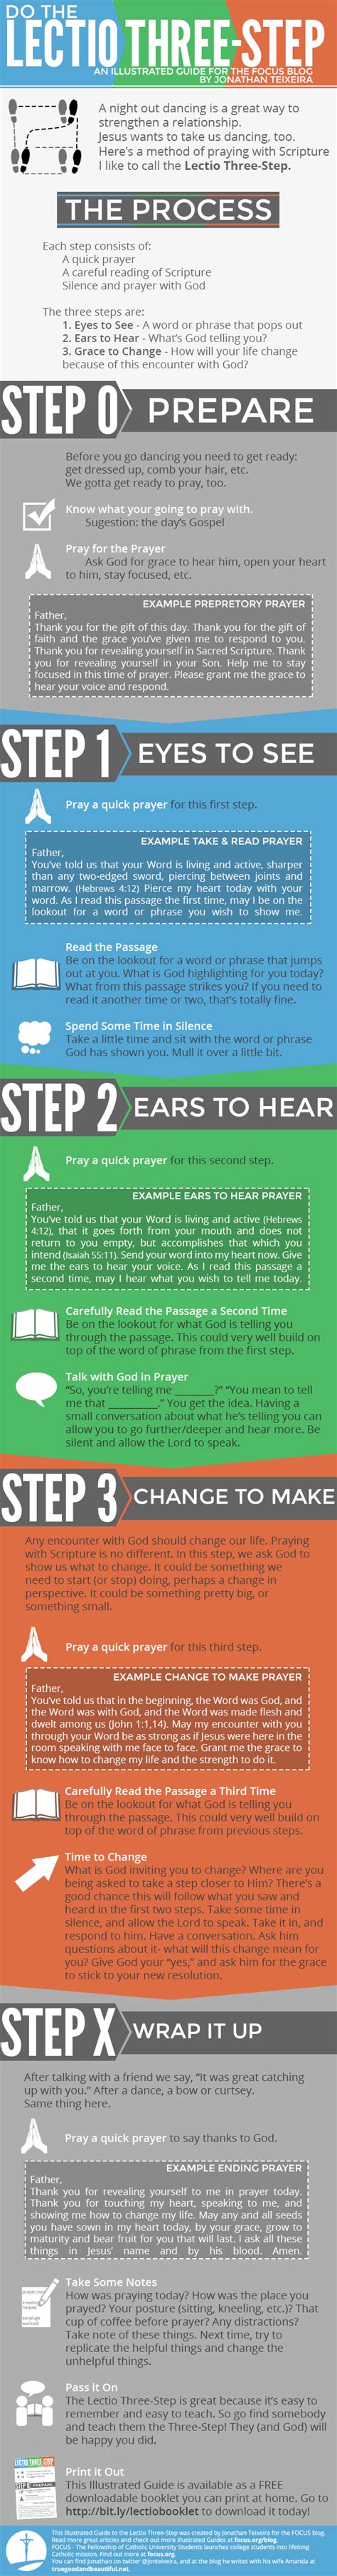 Do The Lectio 3 Step An Easy Illustrated Guide To Praying Lectio